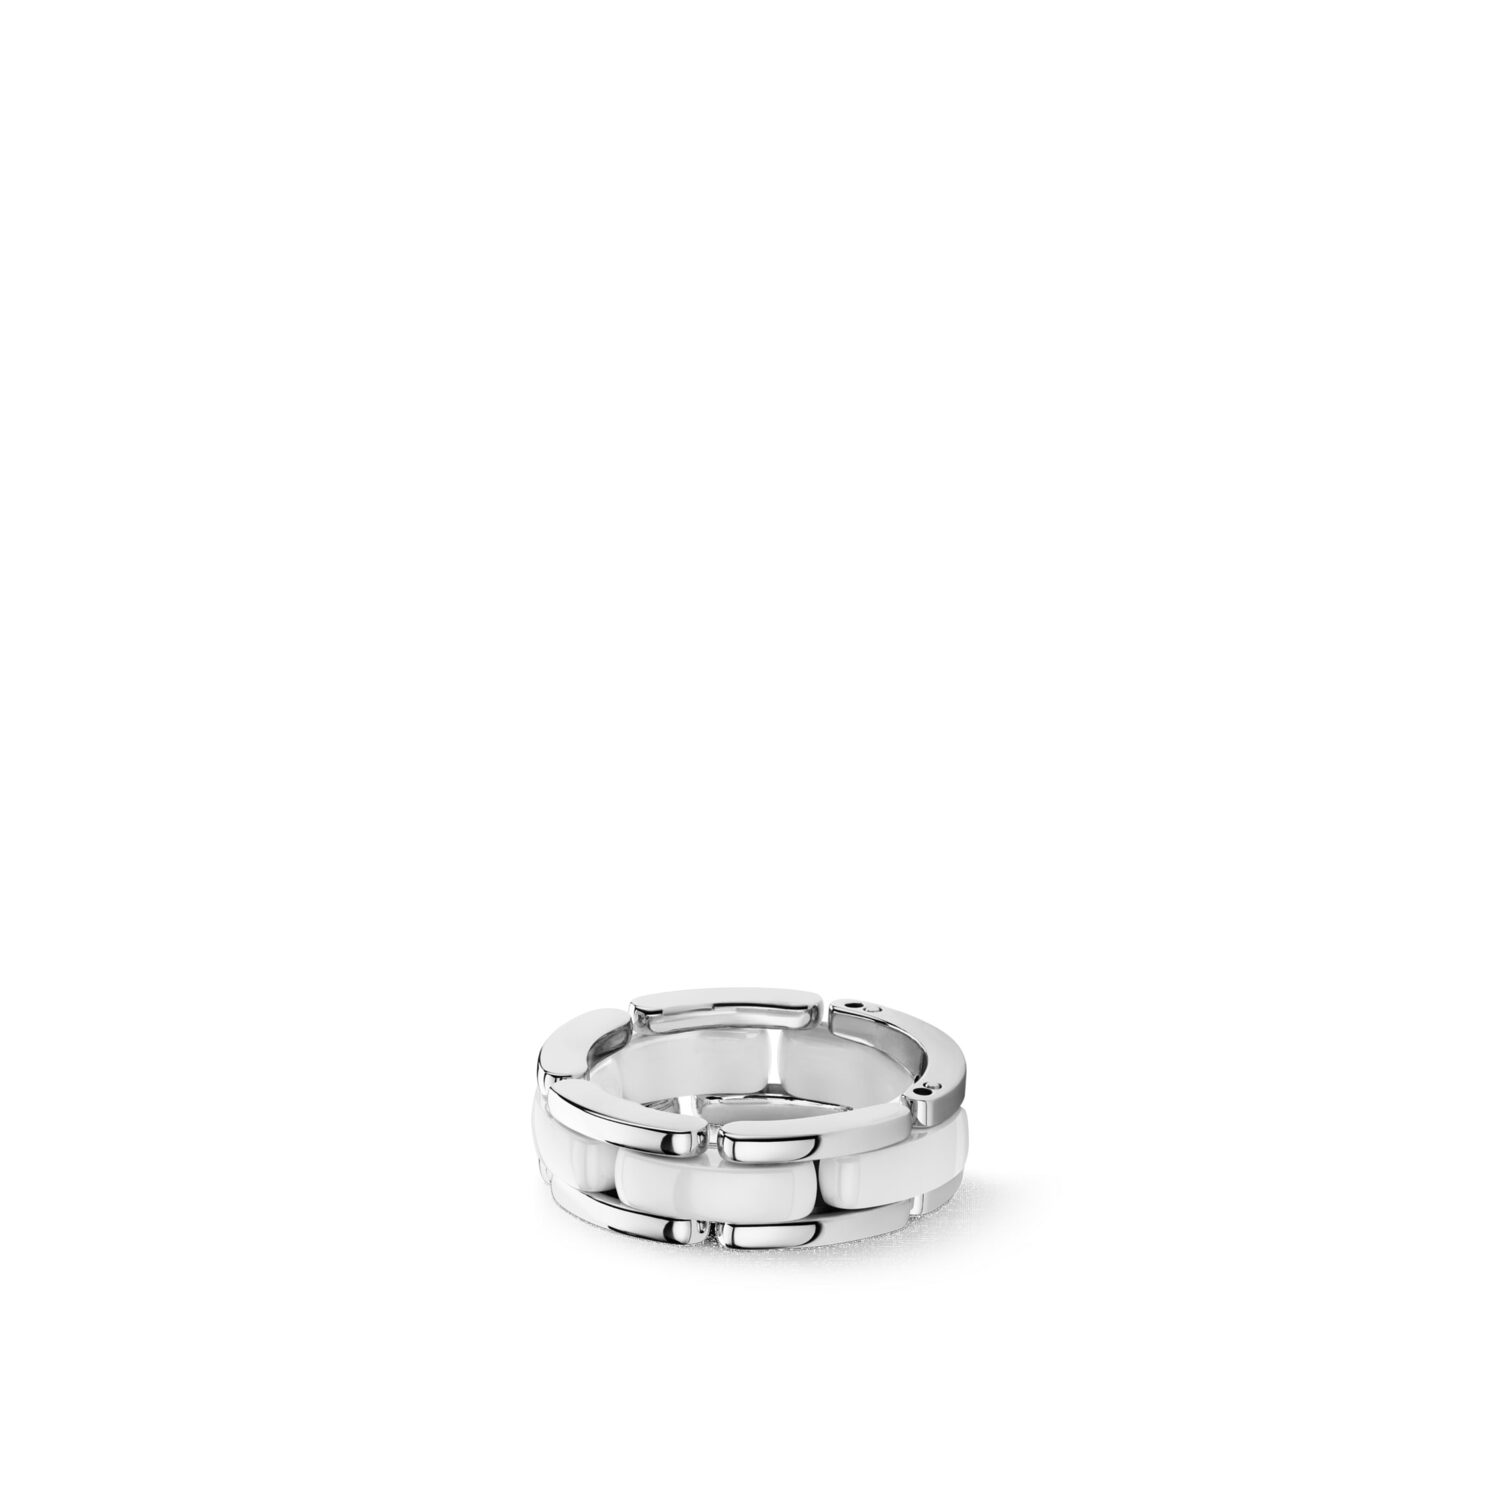 White gold and black ceramic Chanel Ultra ring